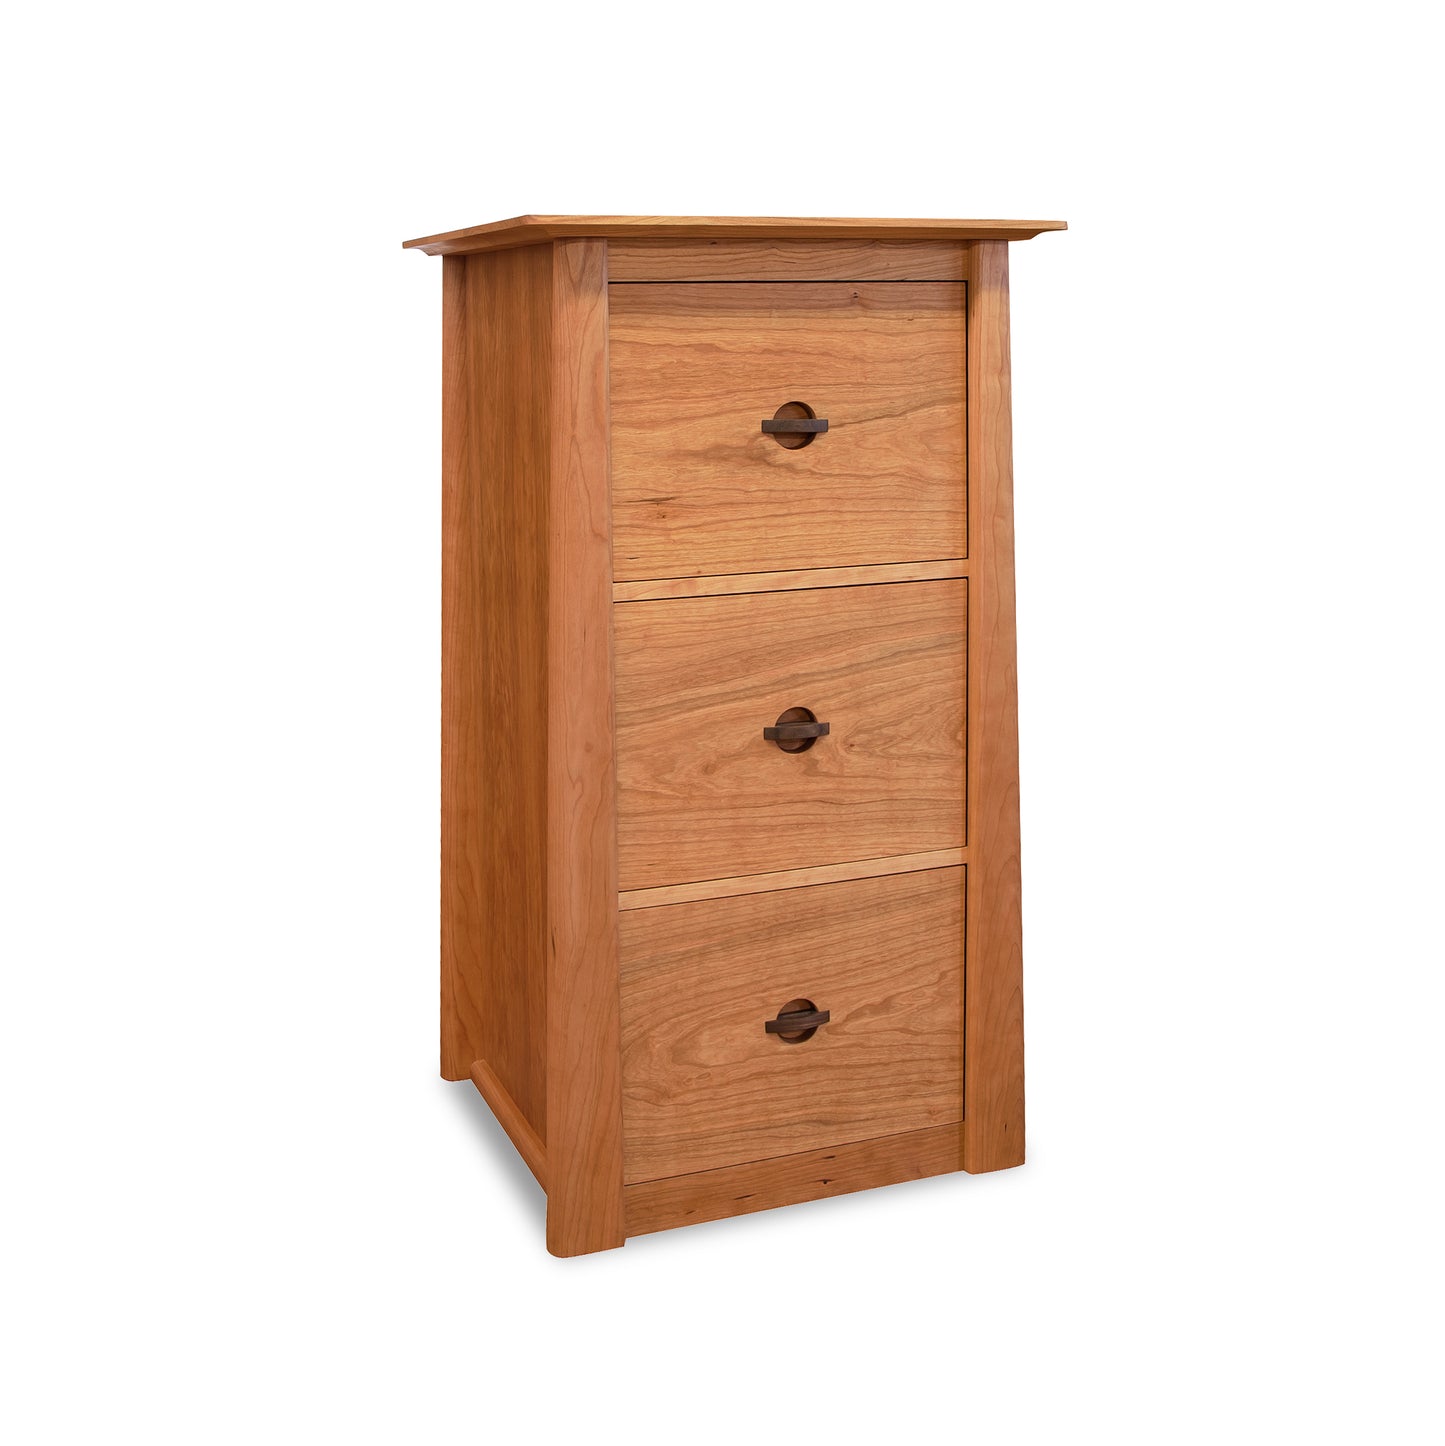 A Cherry Moon File Cabinet by Maple Corner Woodworks isolated on a white background.